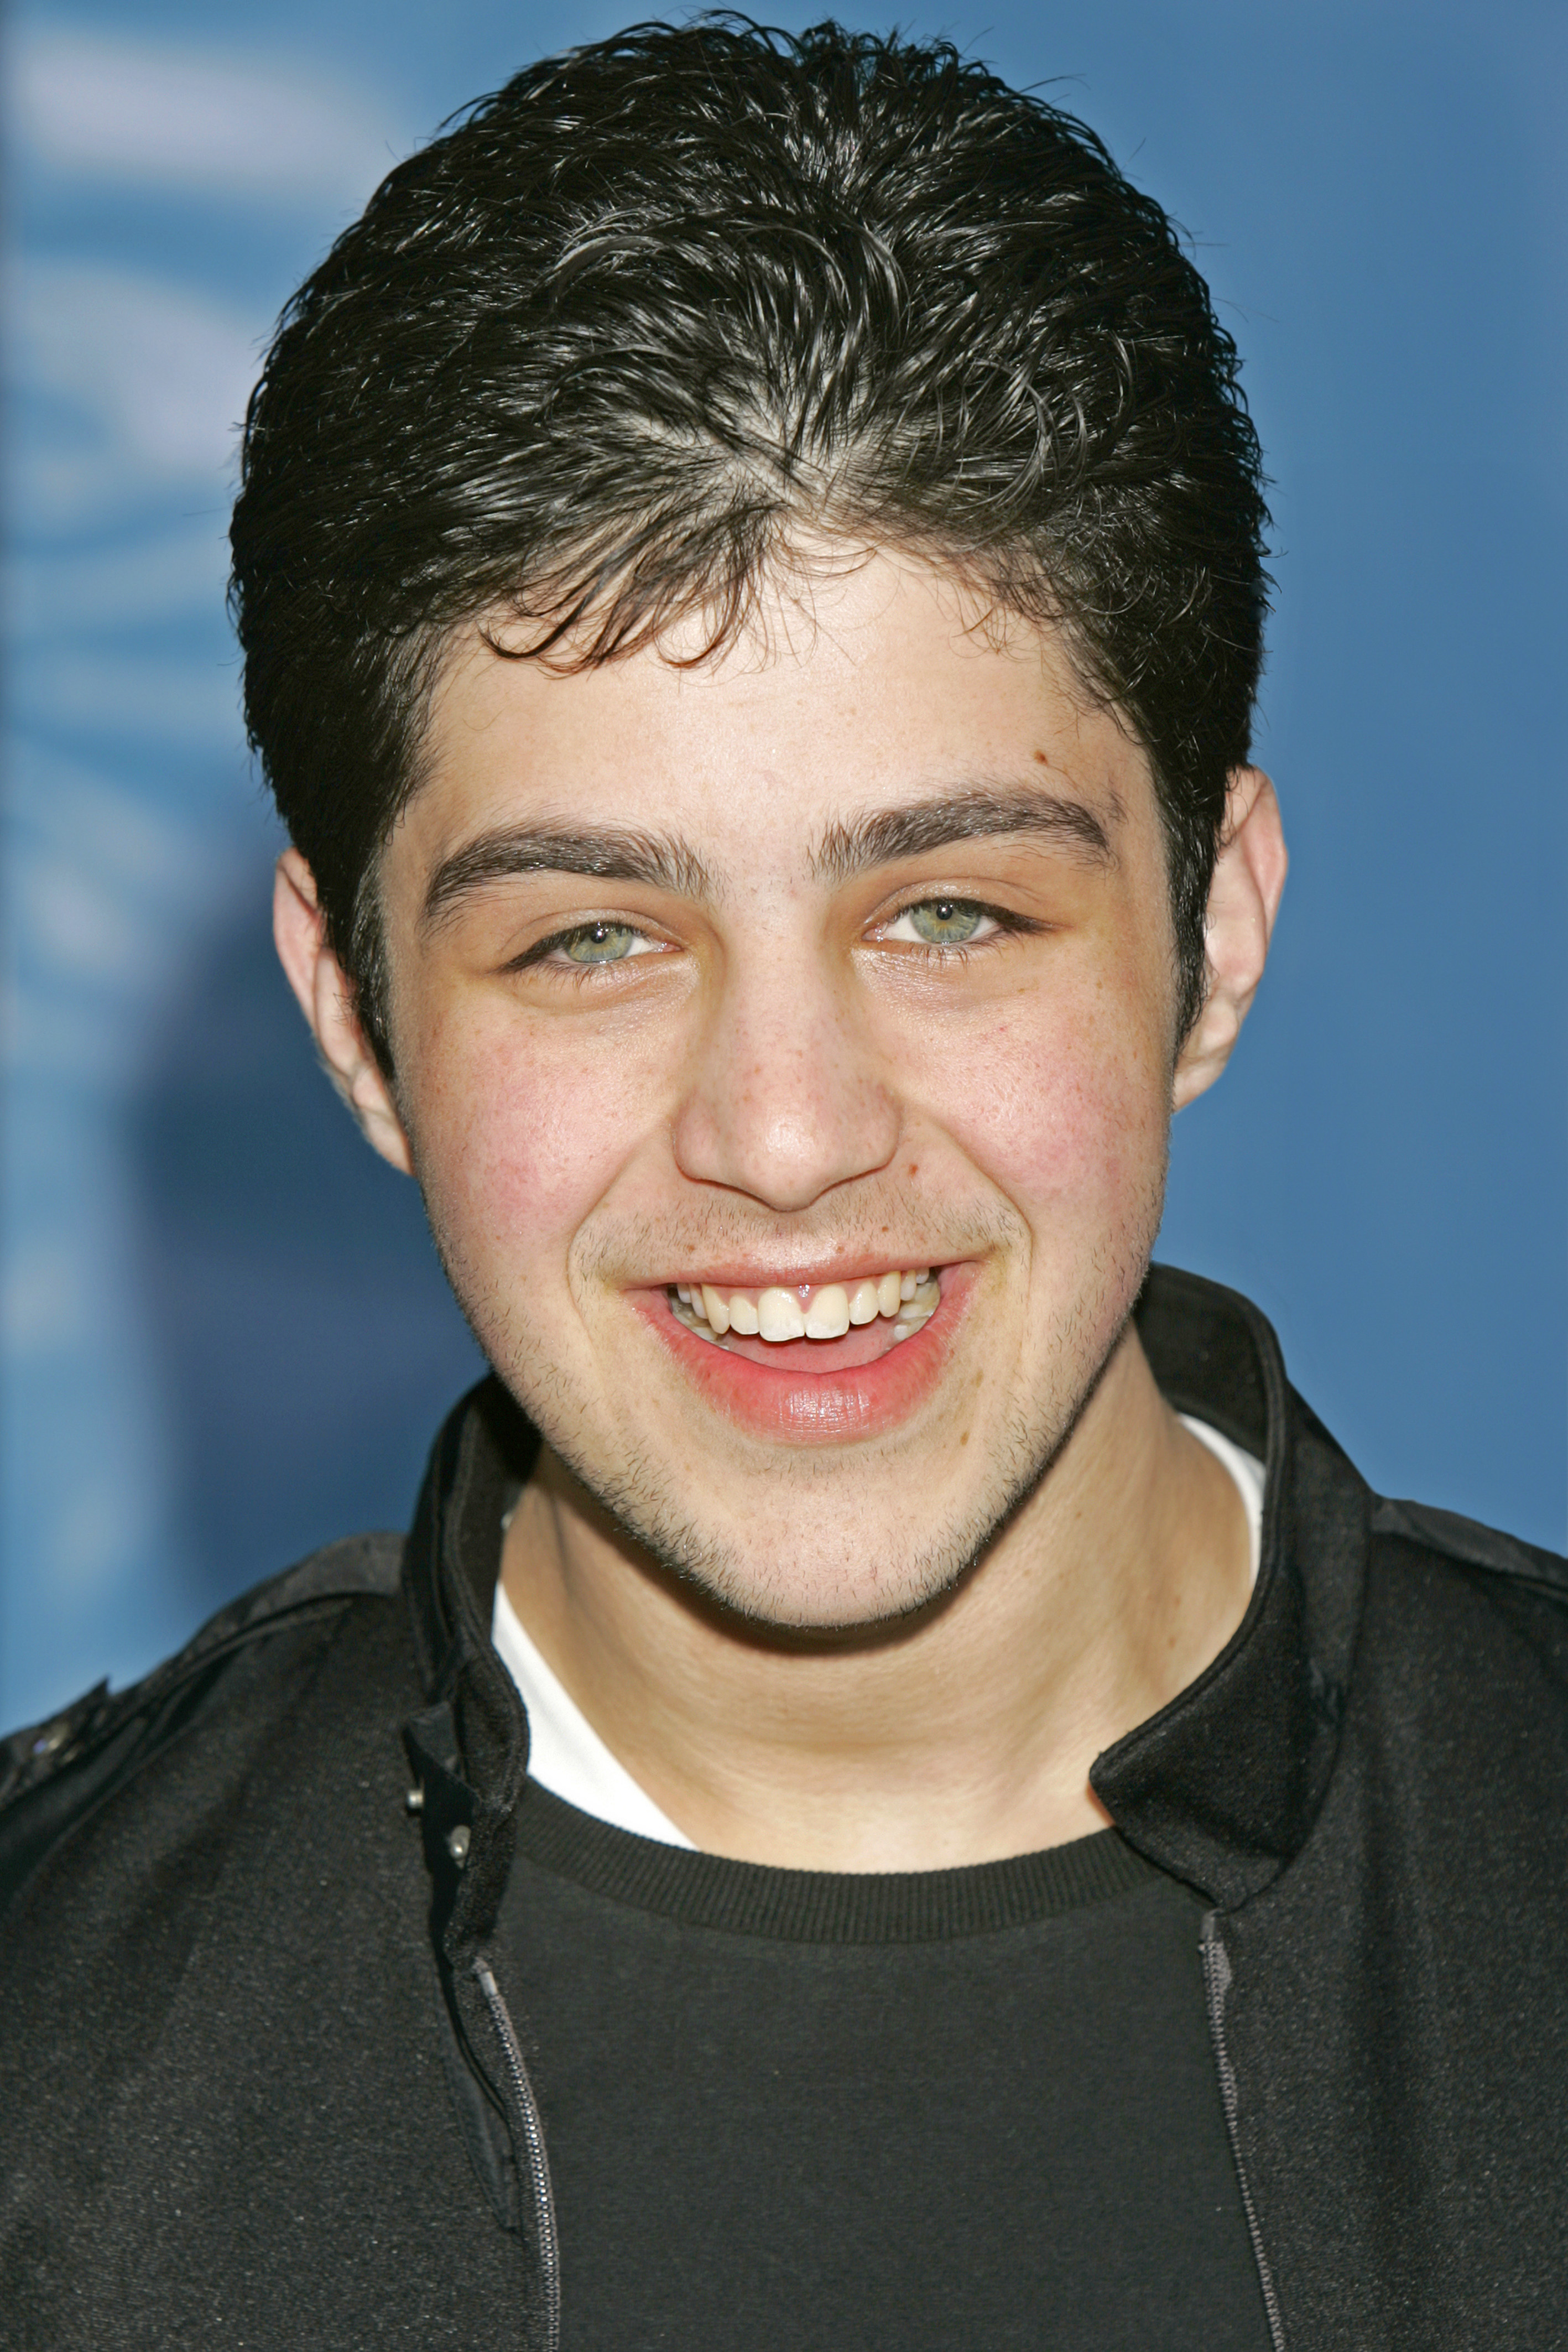 Josh Peck laughing at an event in 1998